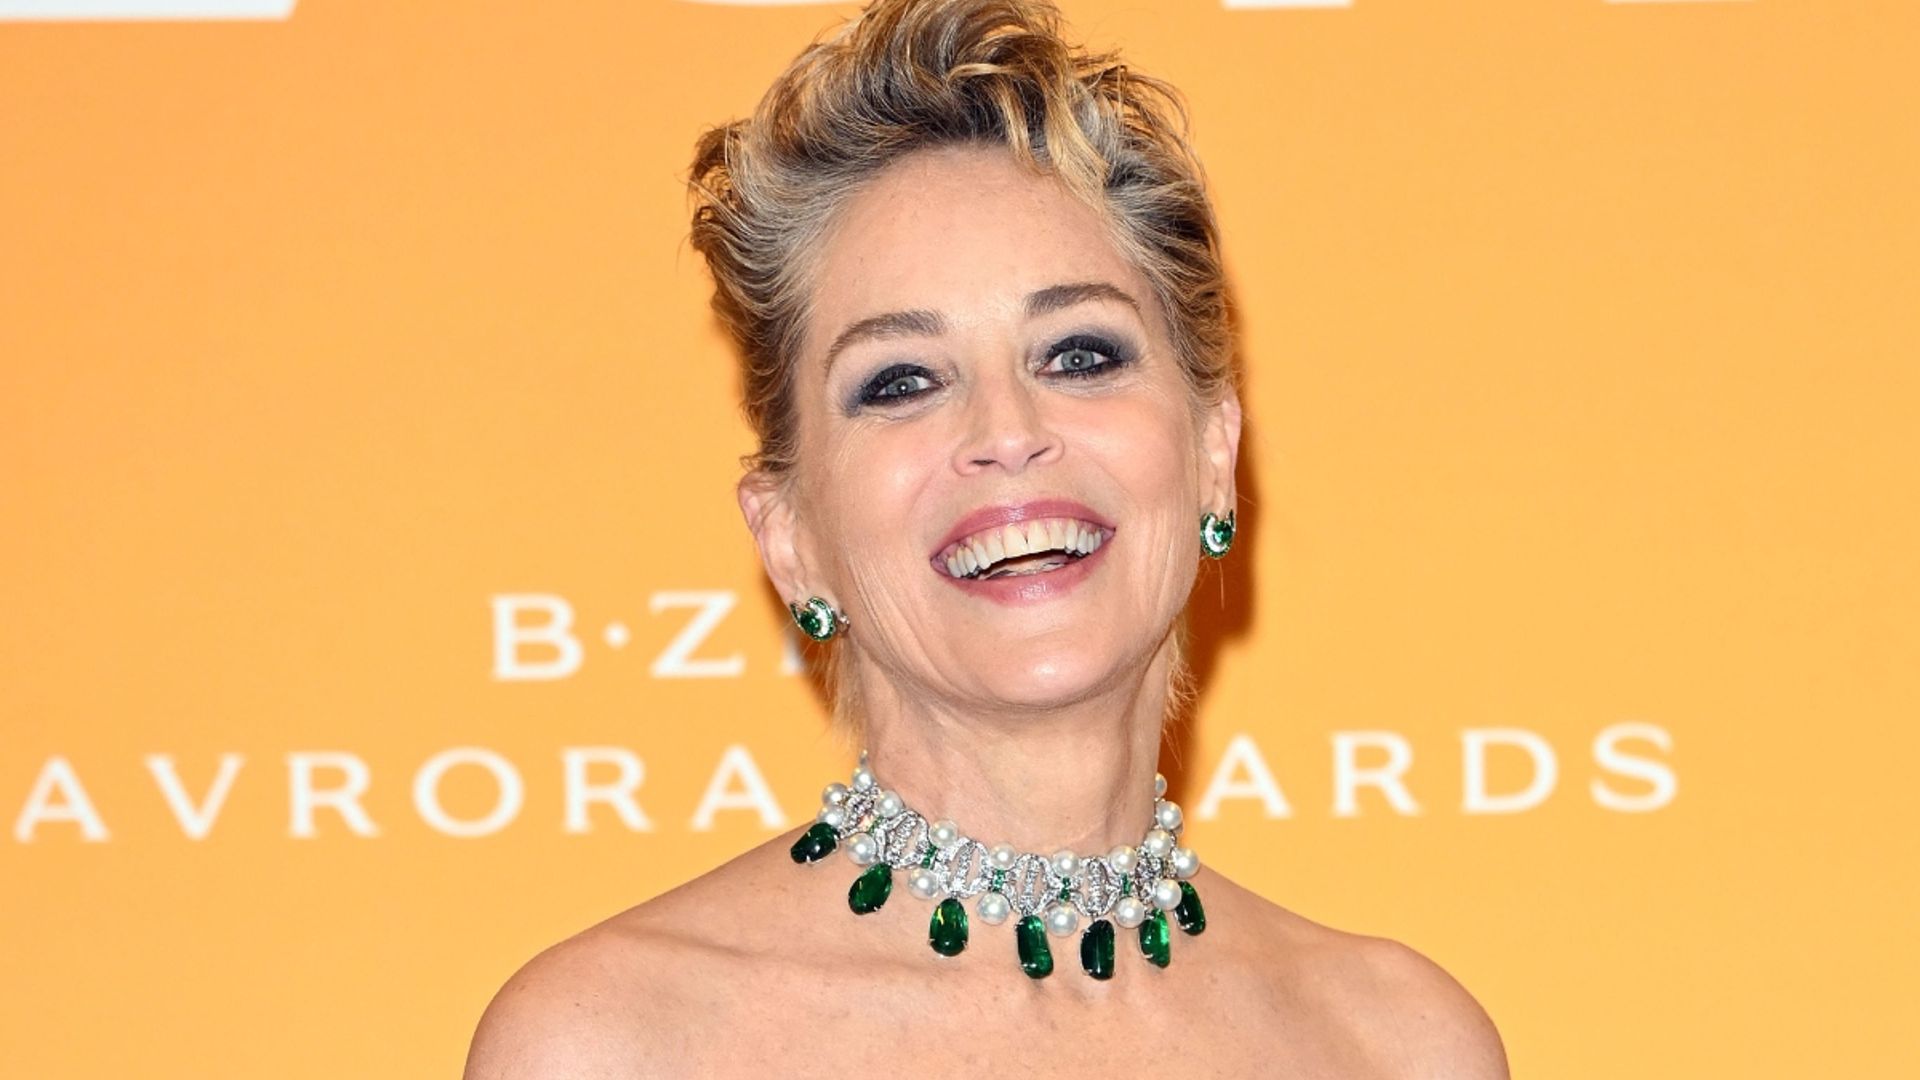 Sharon Stone looks statuesque in jaw-dropping black gown